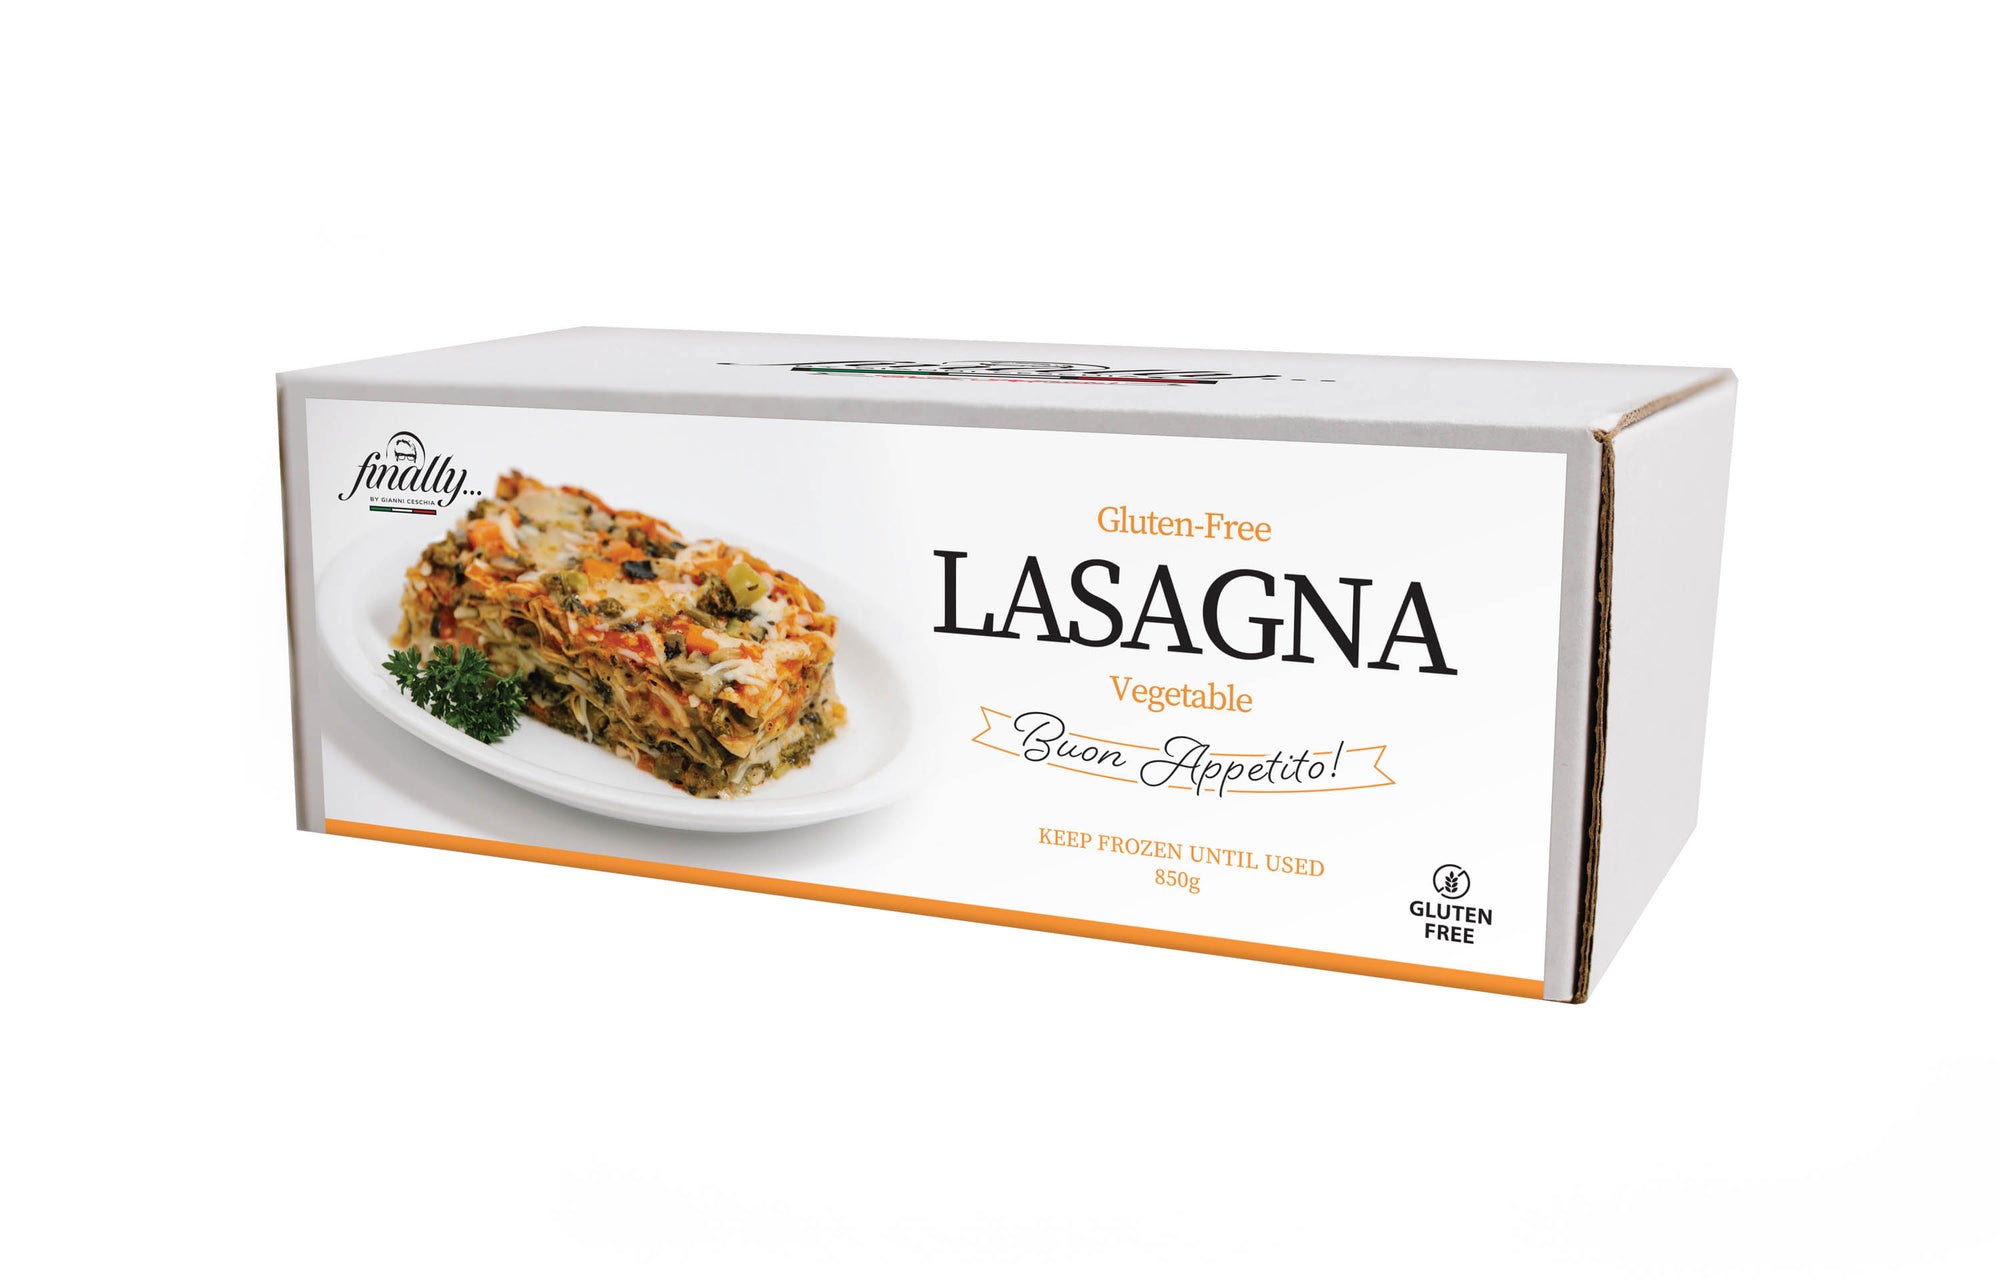 Gluten Free Vegetable Lasagna on a plate